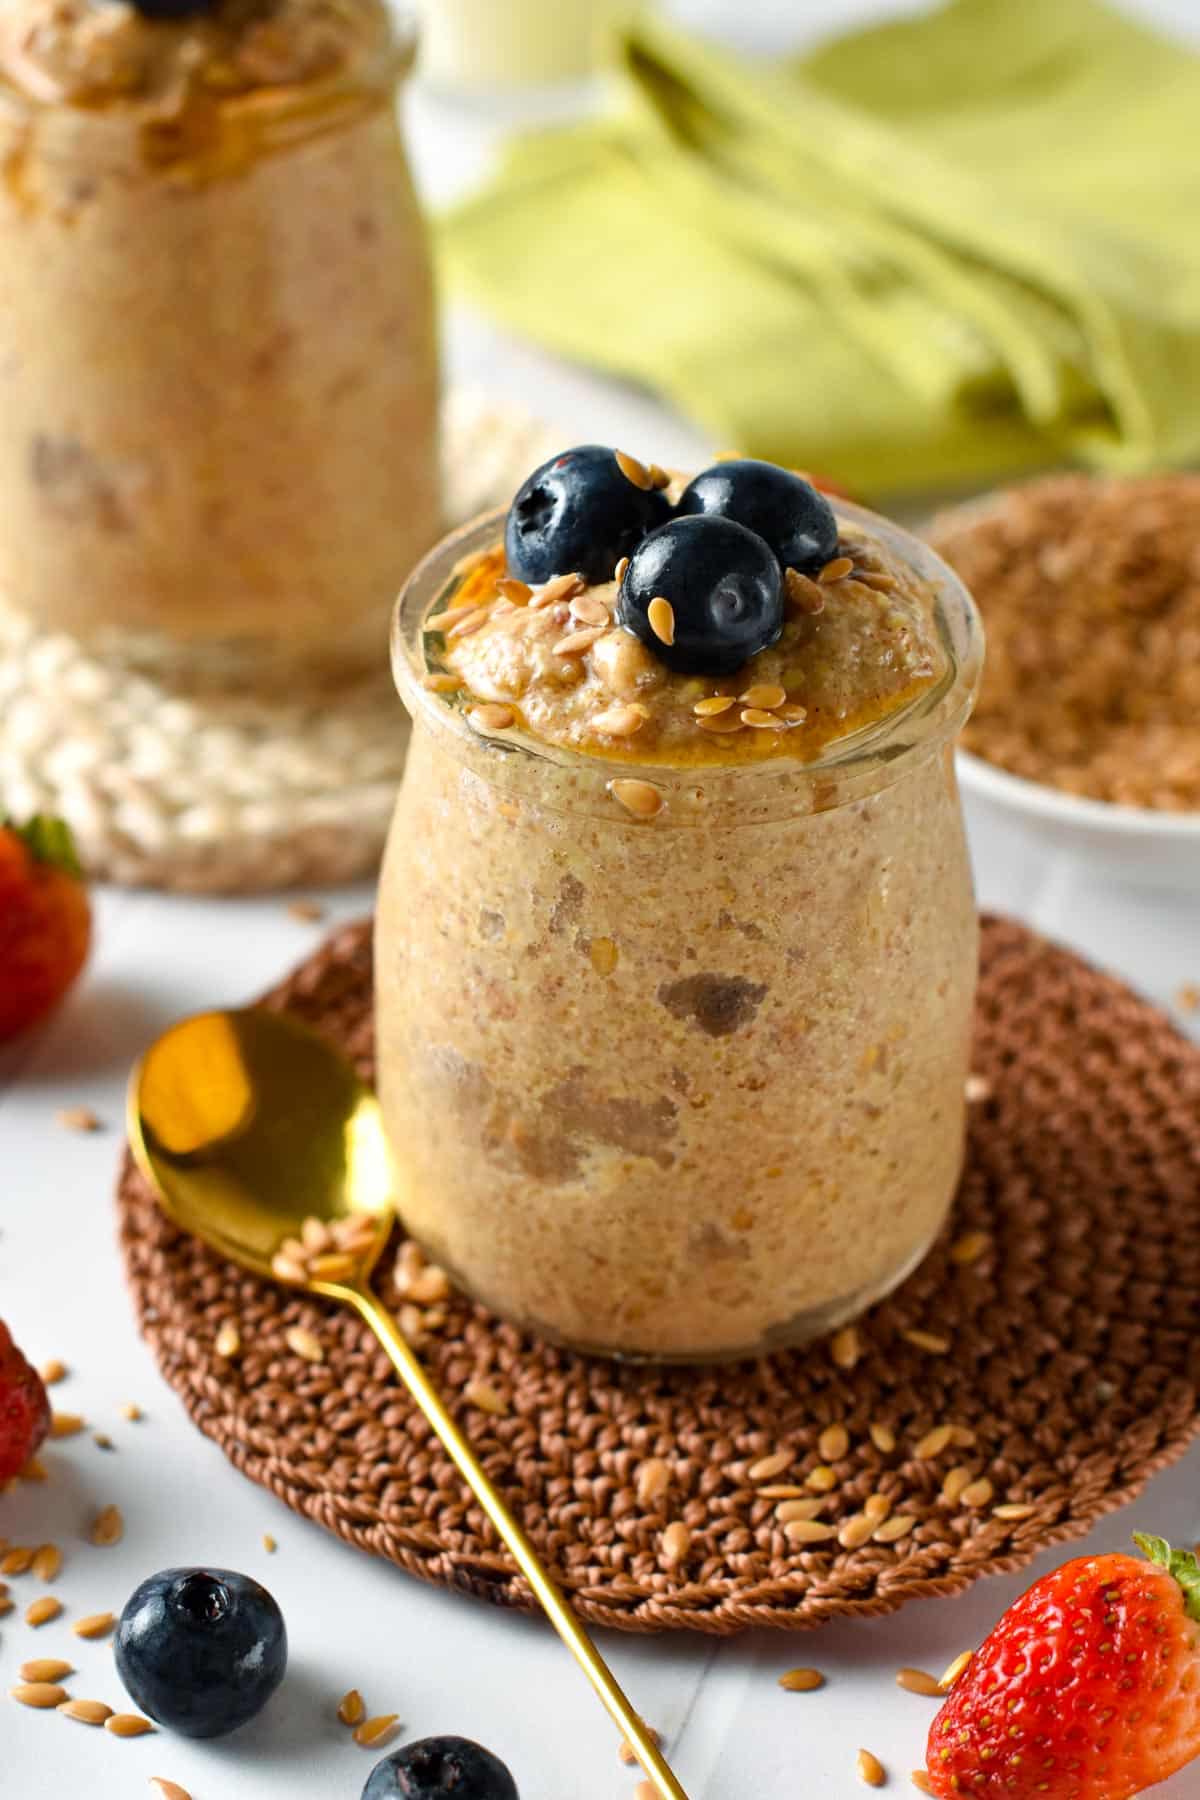 This Flaxseed pudding is an easy healthy high-fiber breakfast with 12g of fiber per serve and a delicious vanilla cinnamon flavor.